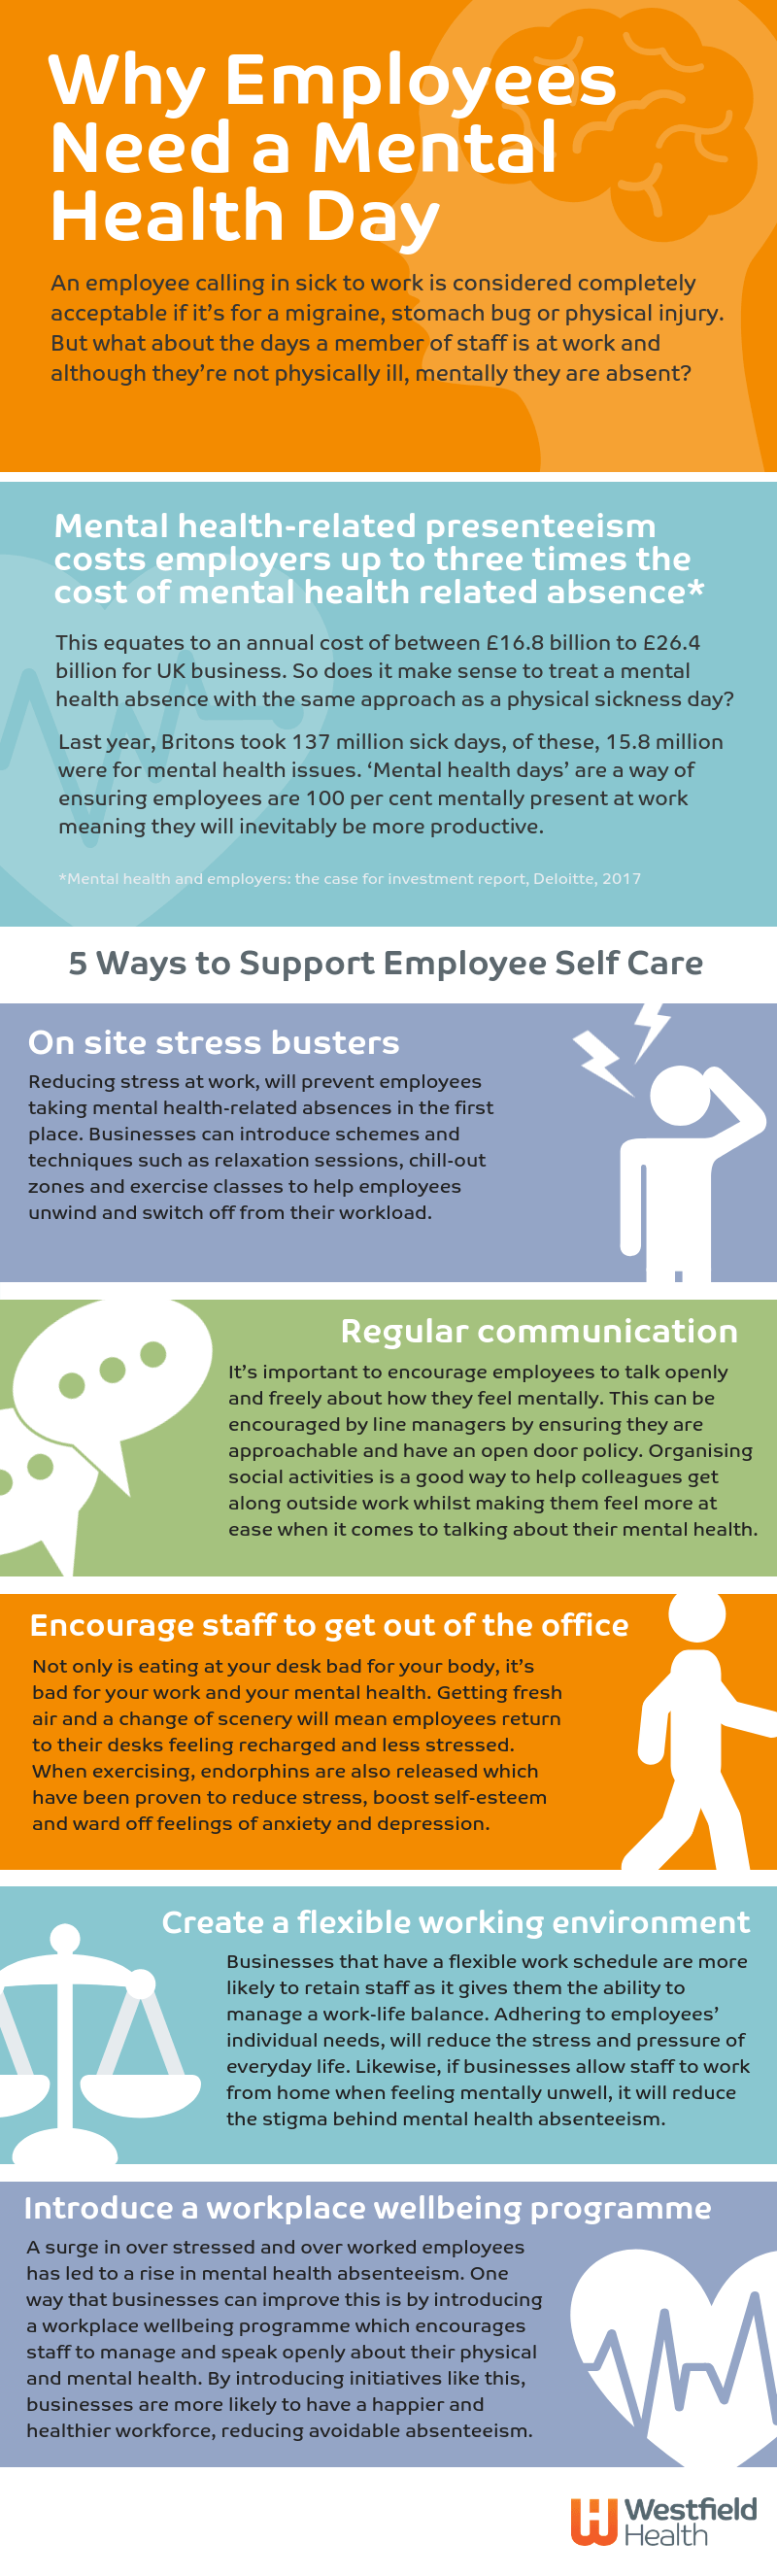 Balancing Well-Being: Employee Mental Health Initiatives